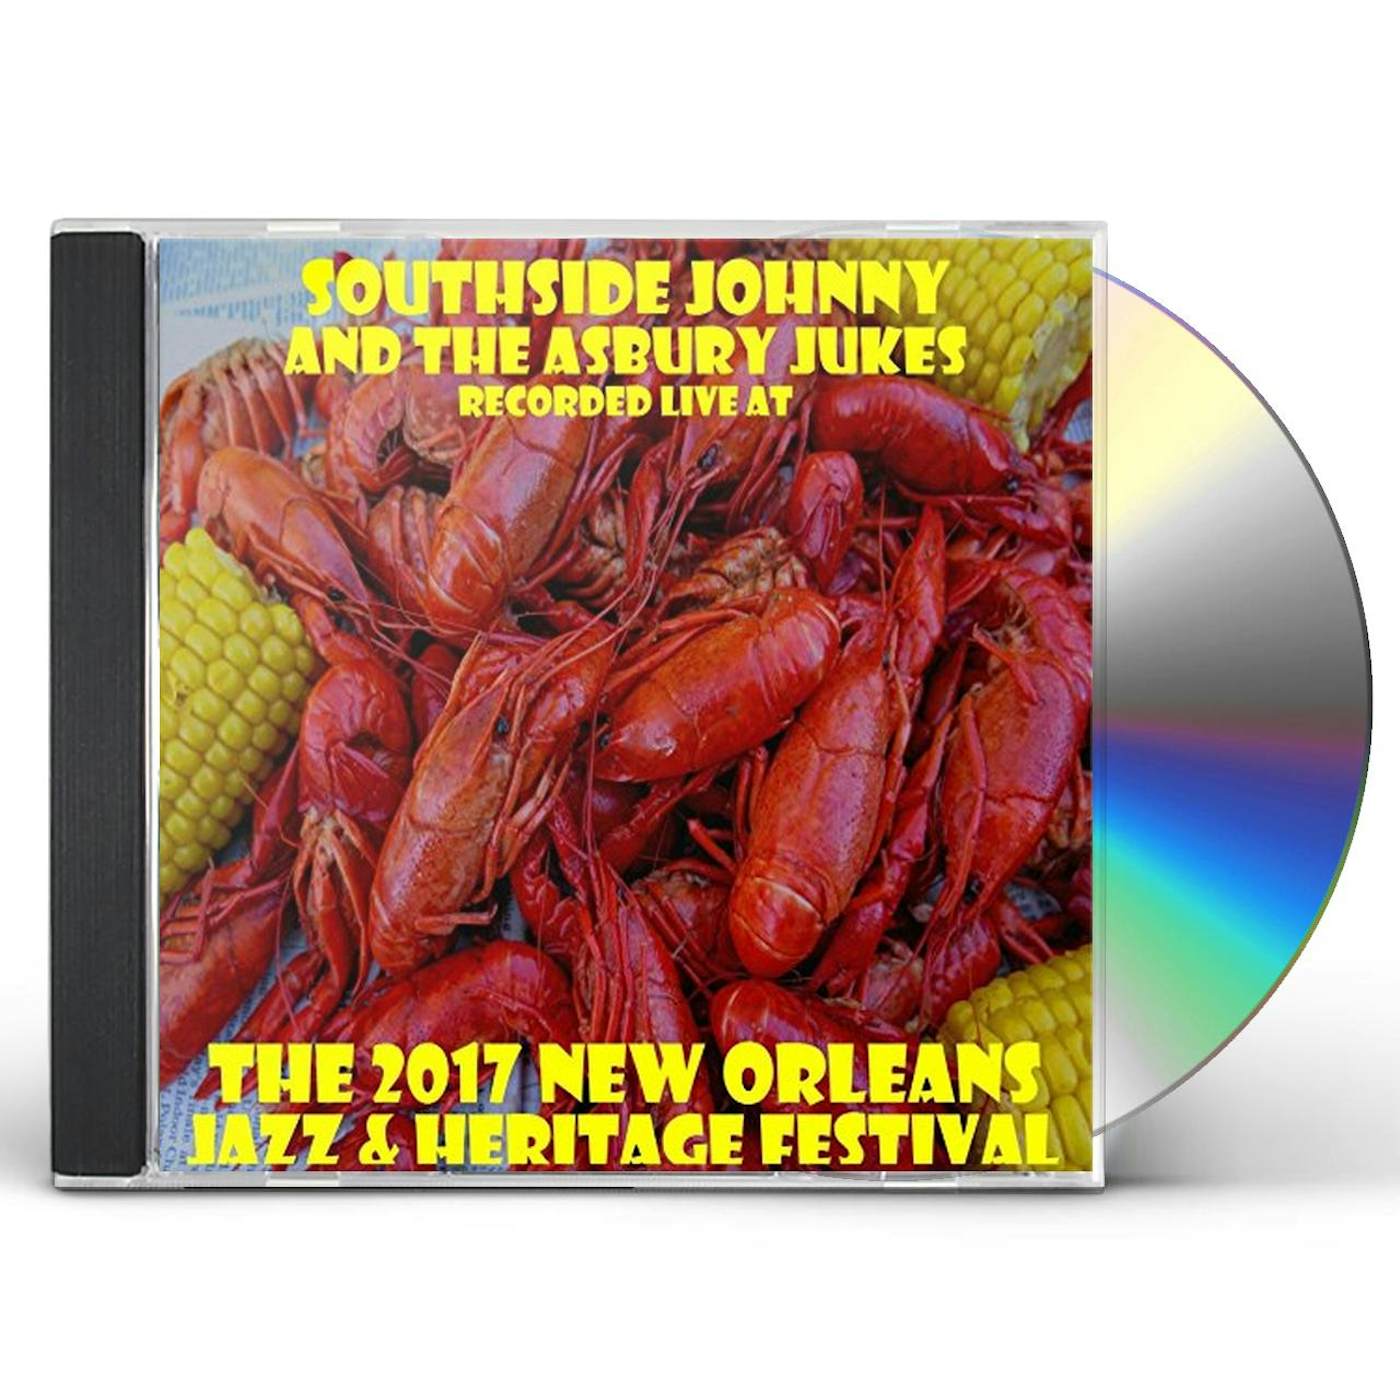 Southside Johnny And The Asbury Jukes LIVE AT JAZZFEST 2017 CD